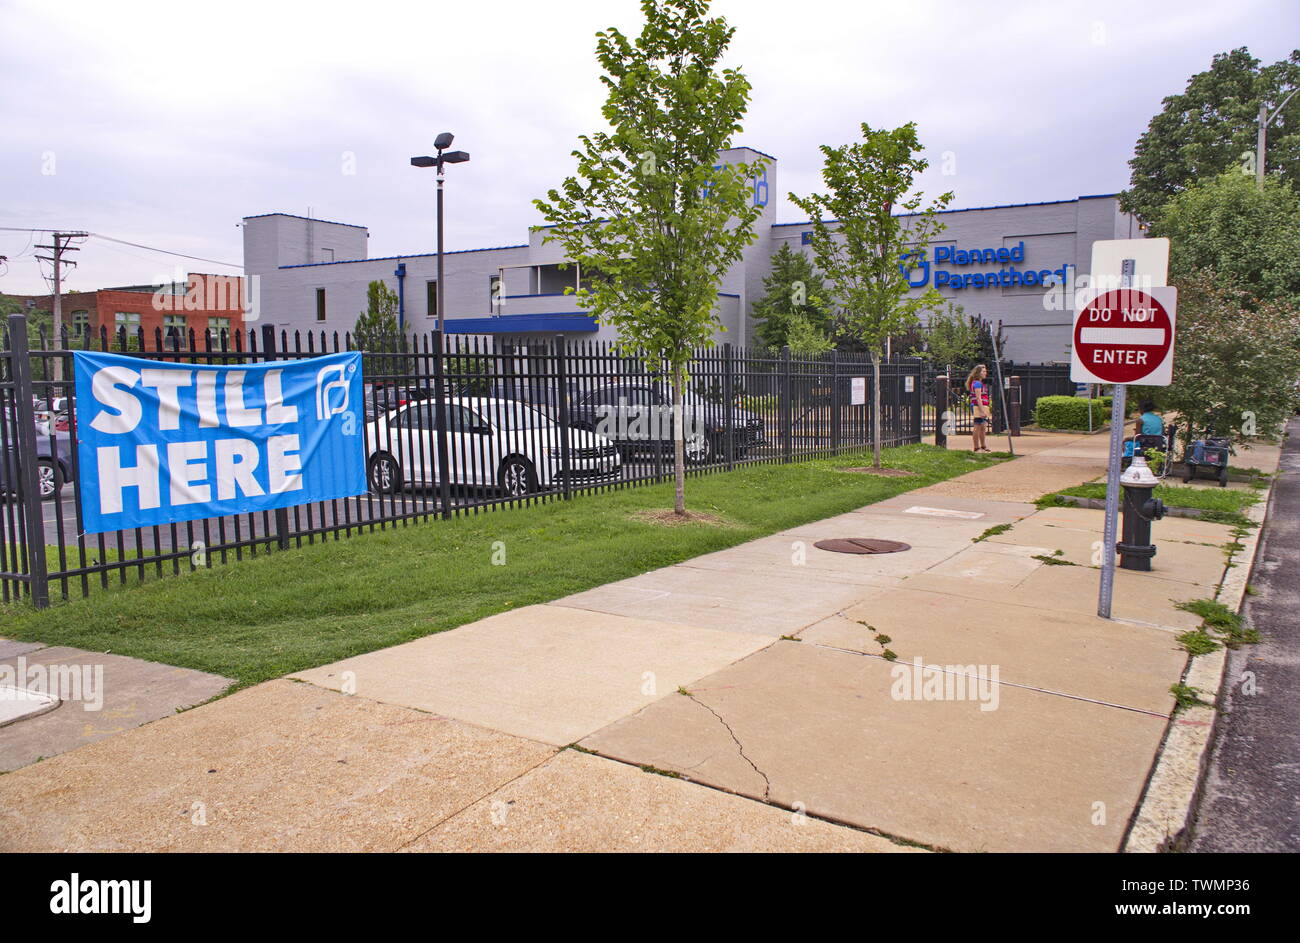 St. Louis, Missouri, USA. 21st June, 2019. Missouri's health department has declined to renew the abortion license for the state's last clinic, but a court order allows the St. Louis Planned Parenthood facility to perform the procedure for now. Credit: Steve Pellegrino/ZUMA Wire/Alamy Live News Stock Photo